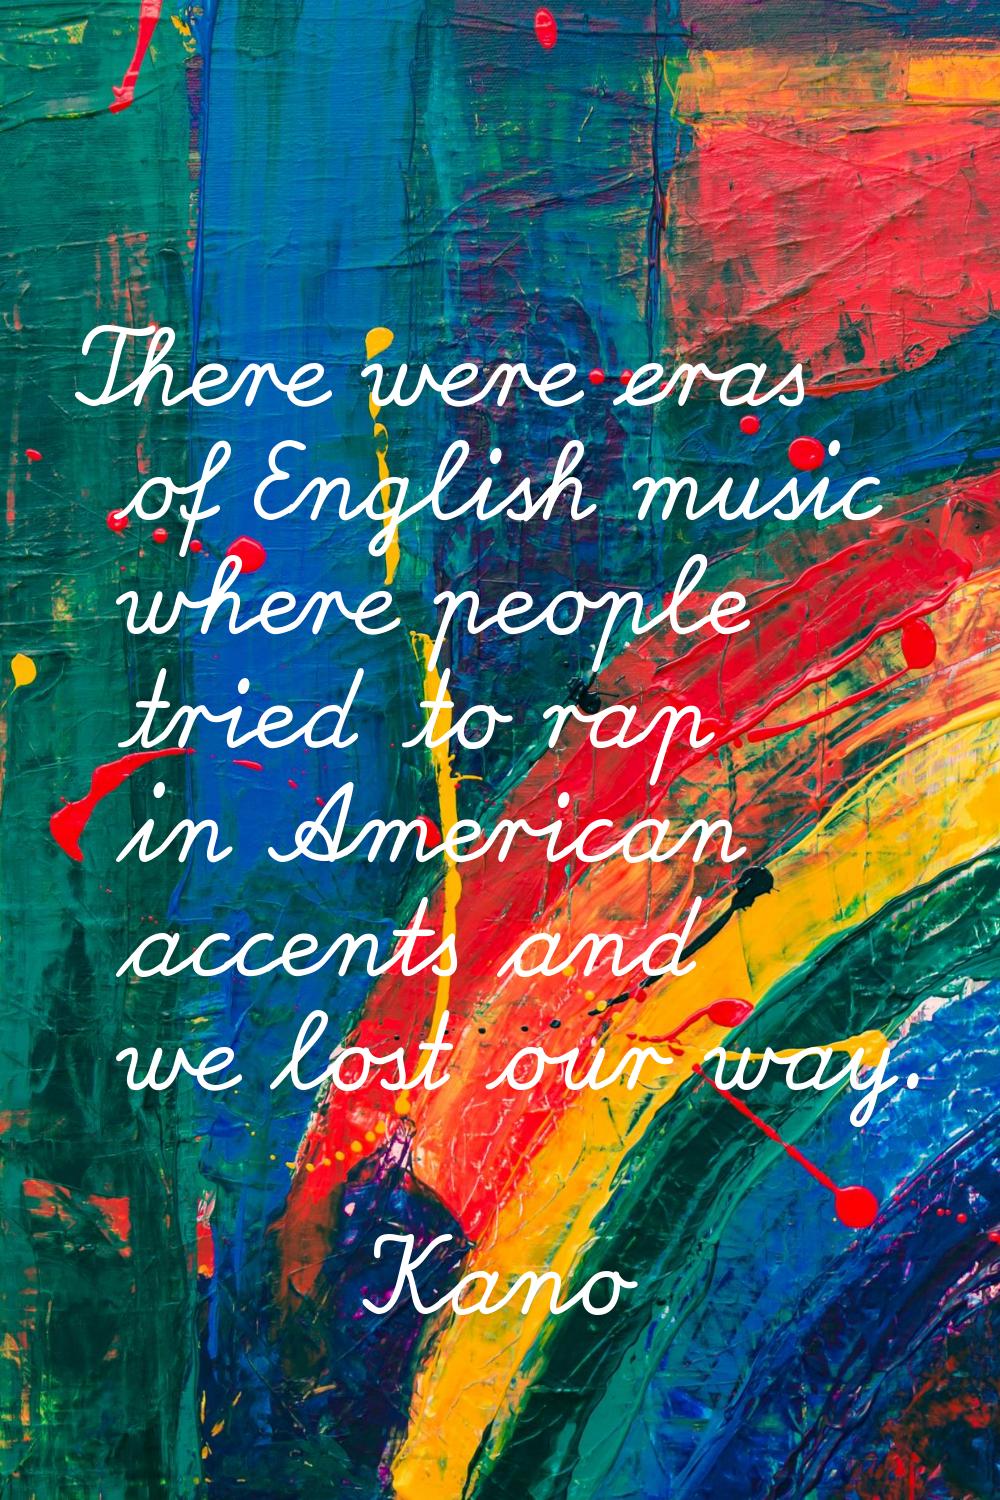 There were eras of English music where people tried to rap in American accents and we lost our way.